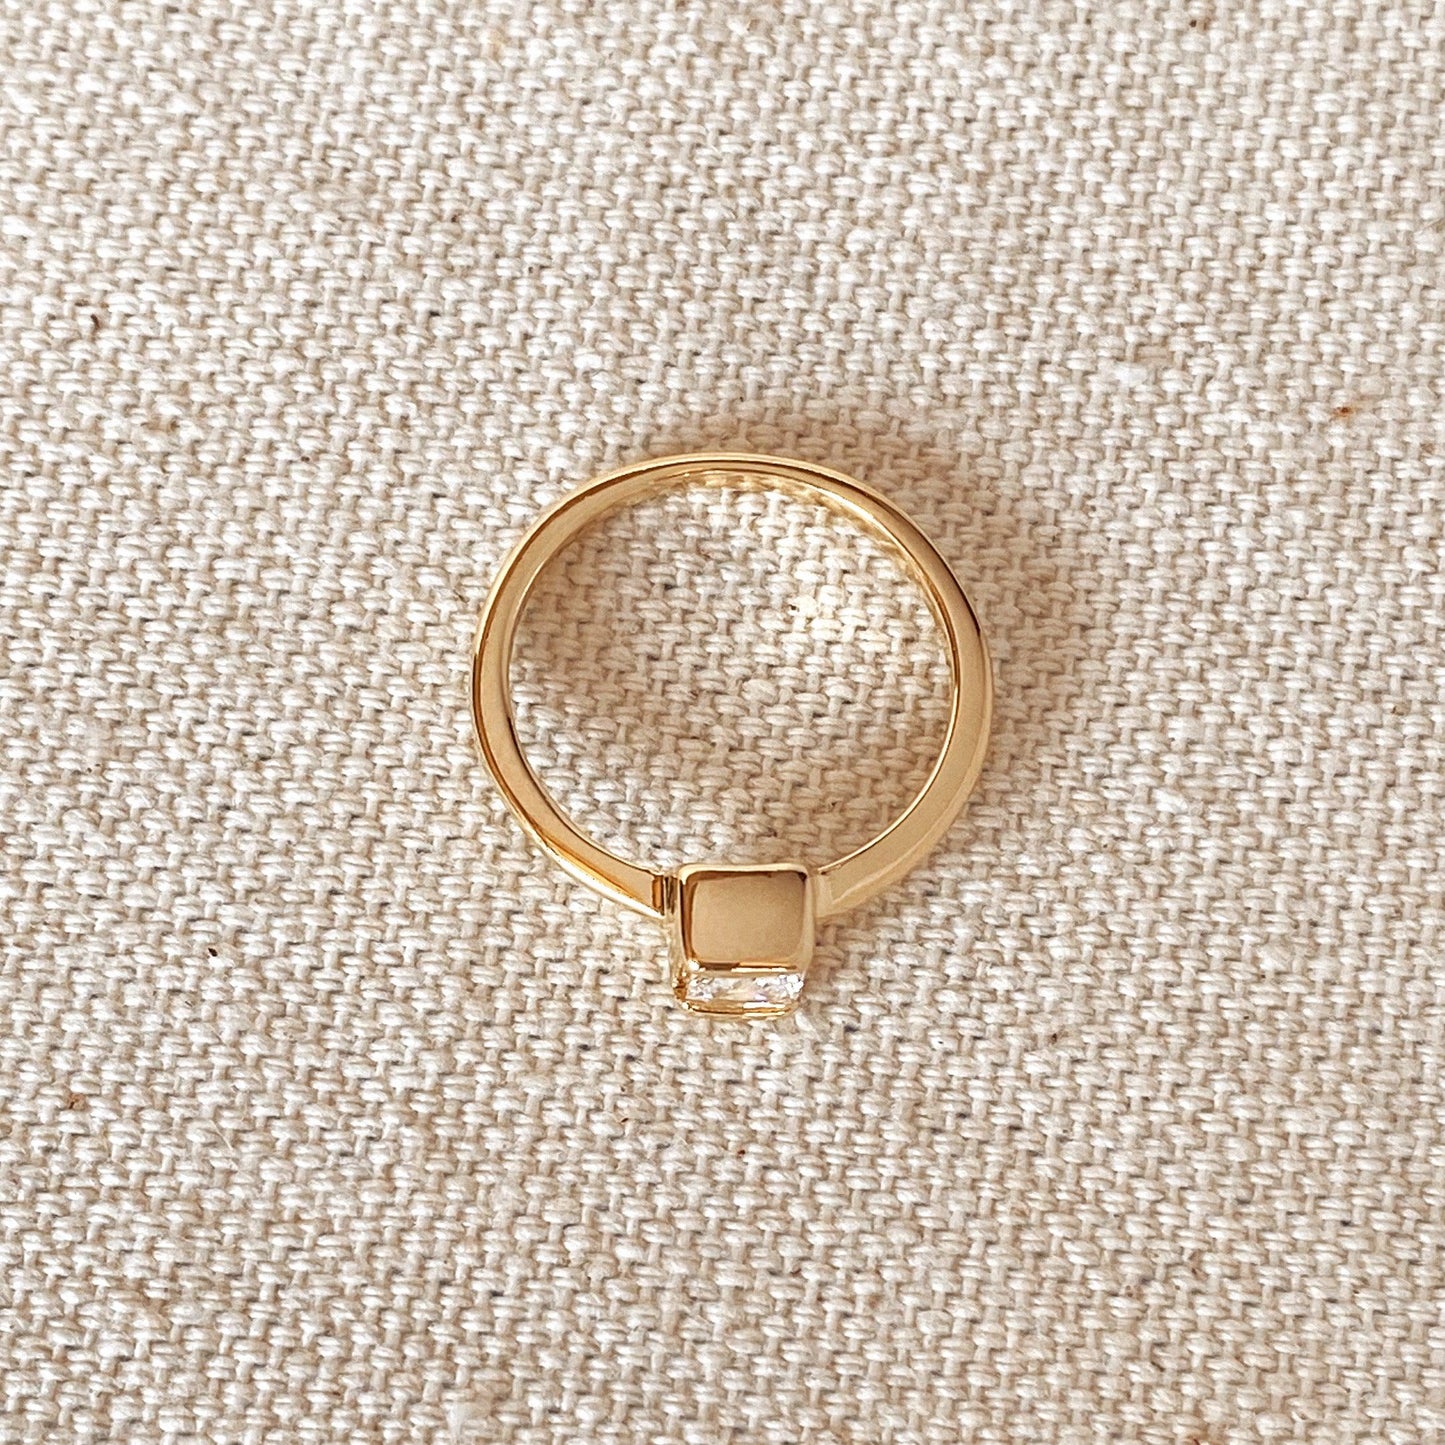 GoldFi Dainty 18k Gold Filled Square Solitaire Ring